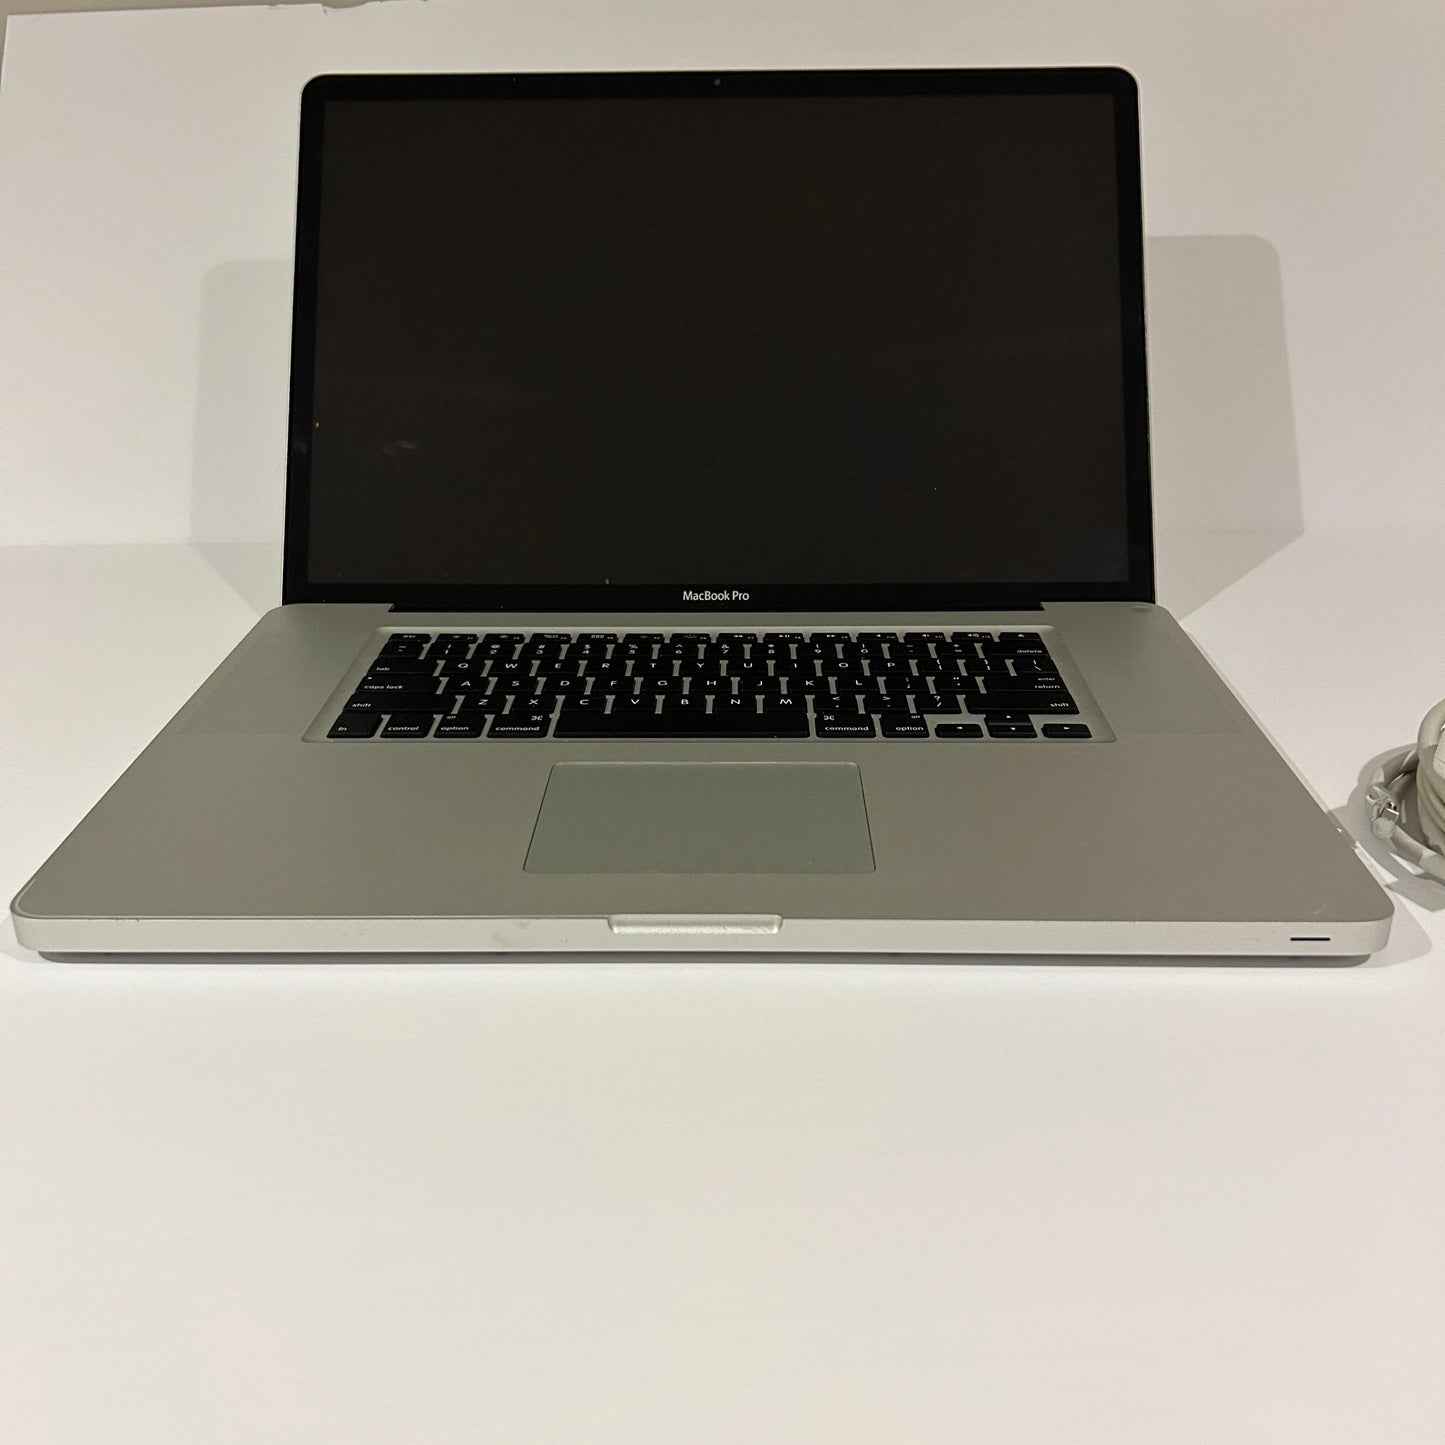 For Parts 17" MacBook Pro "Core i7" 2.4 GHz Late 2011